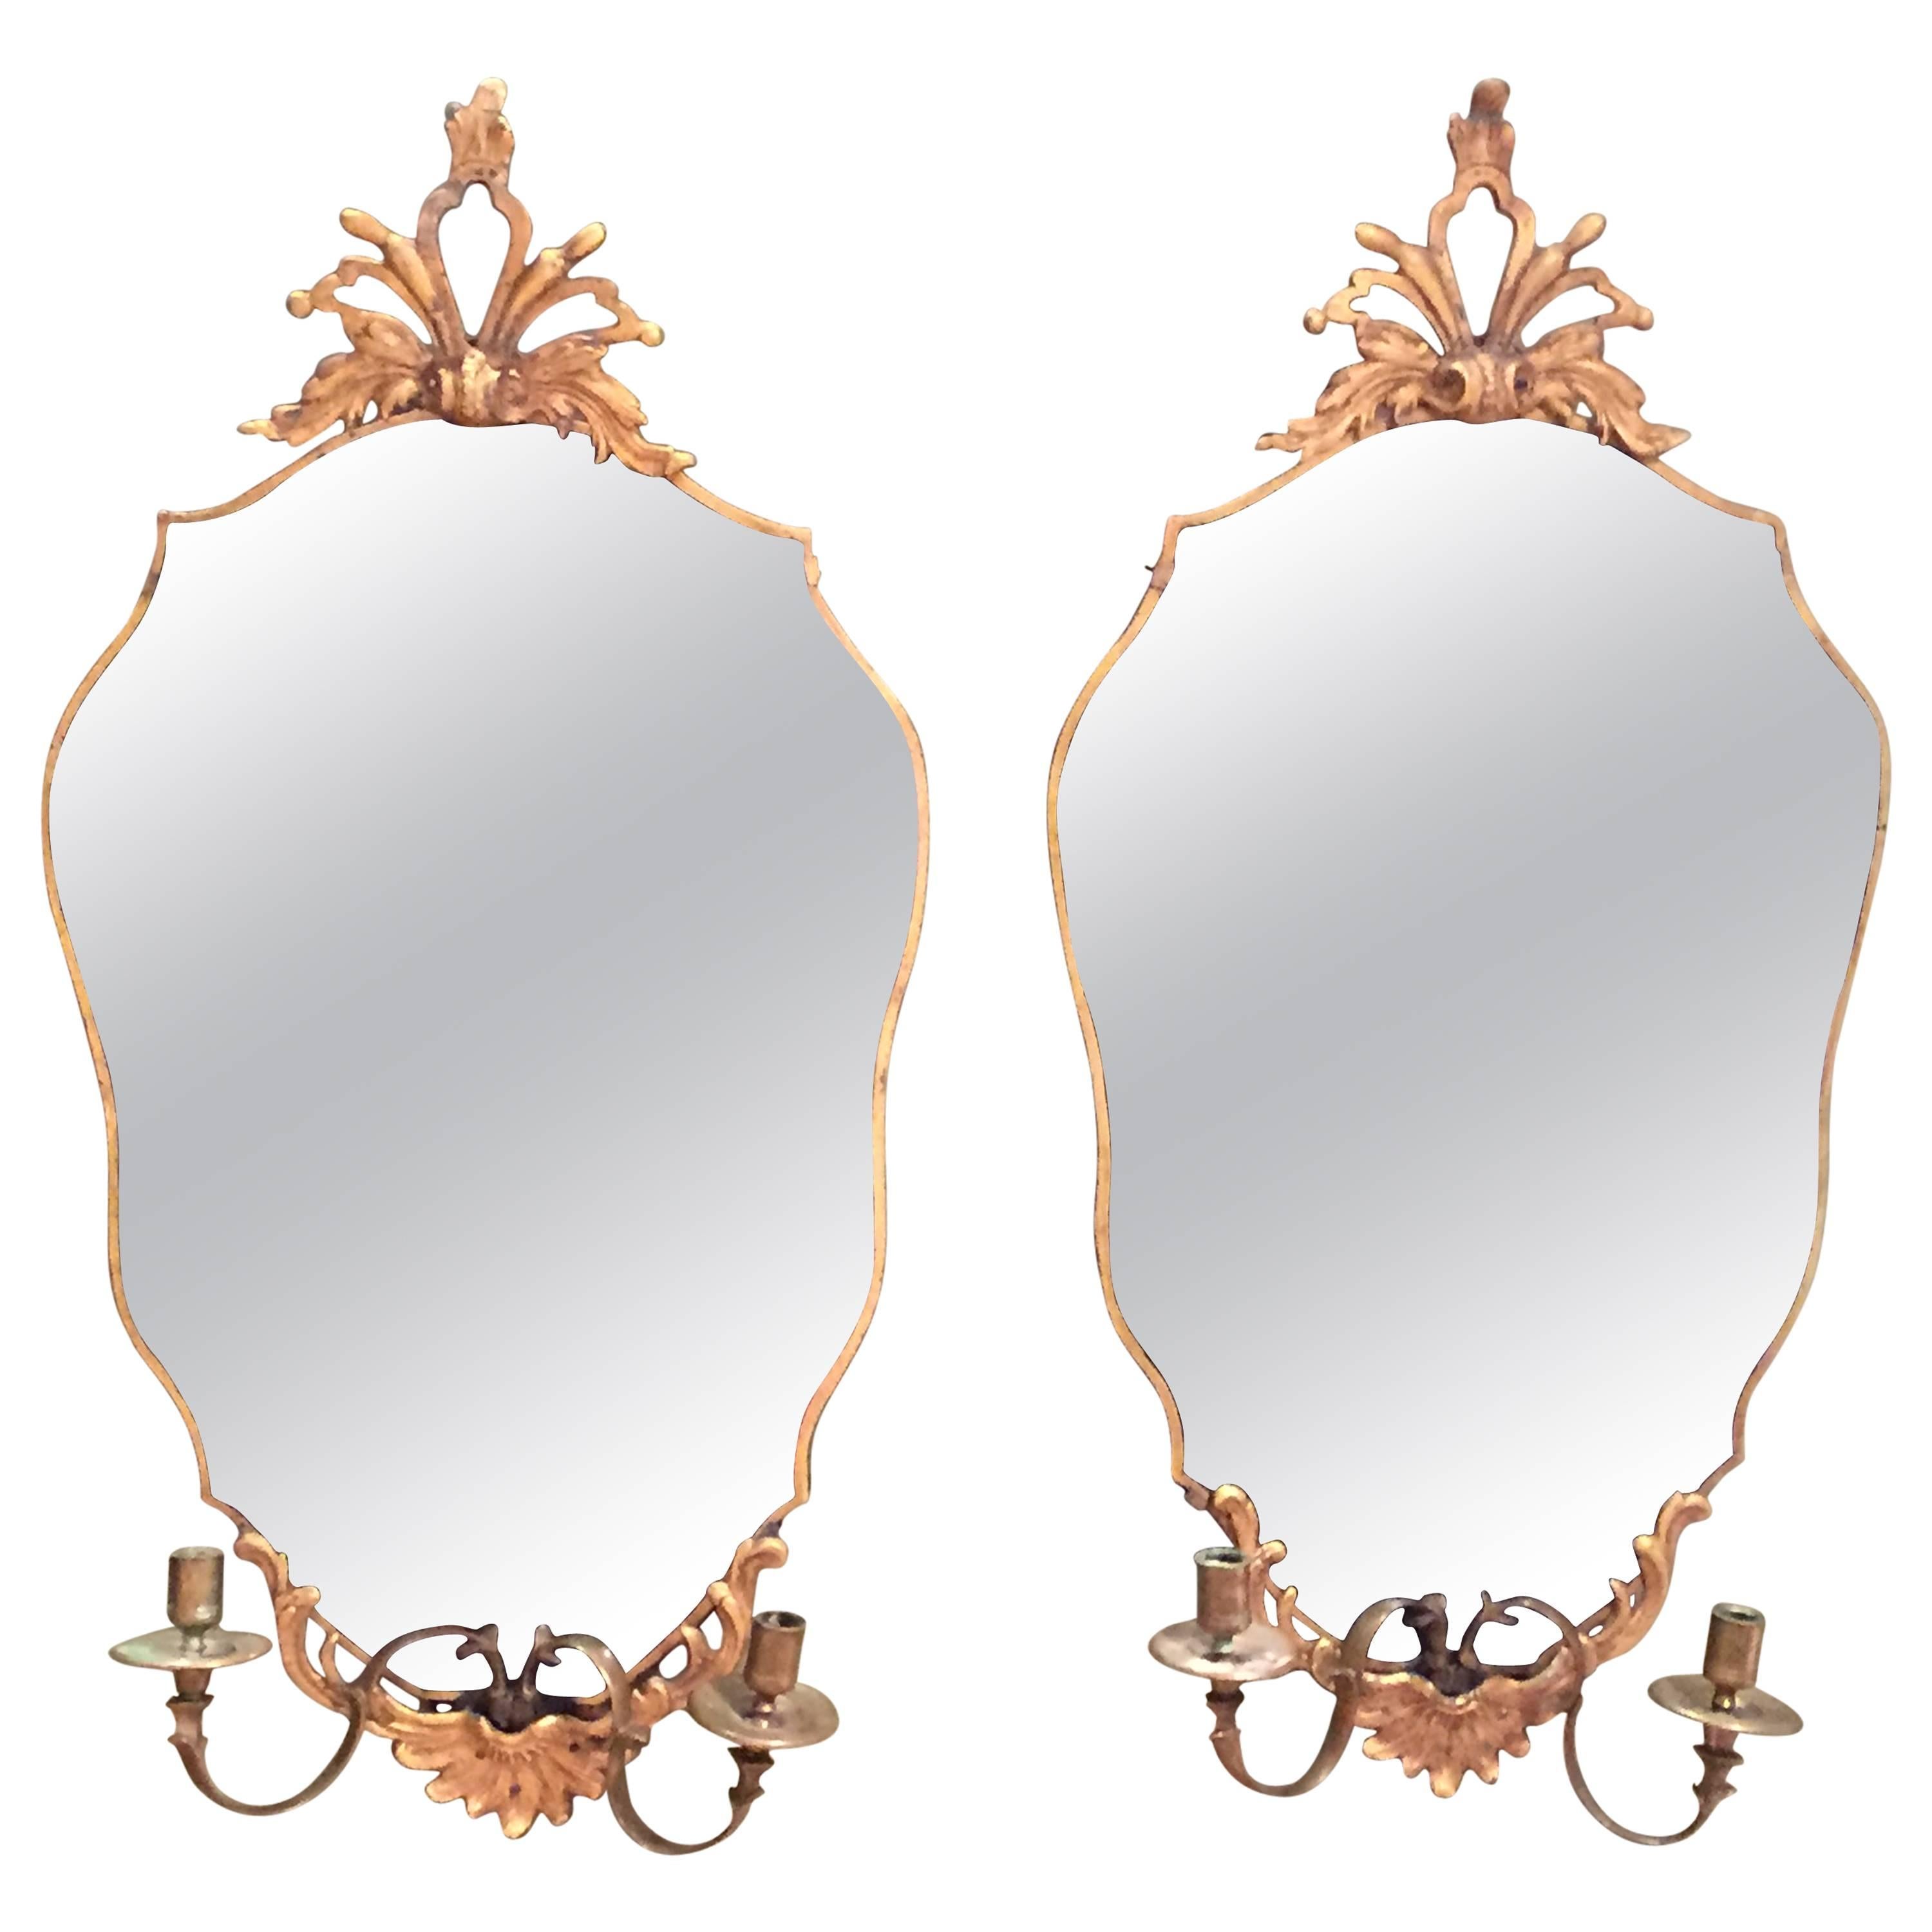 Pair of Continental Mirrored Sconces with Candelabra Arms For Sale